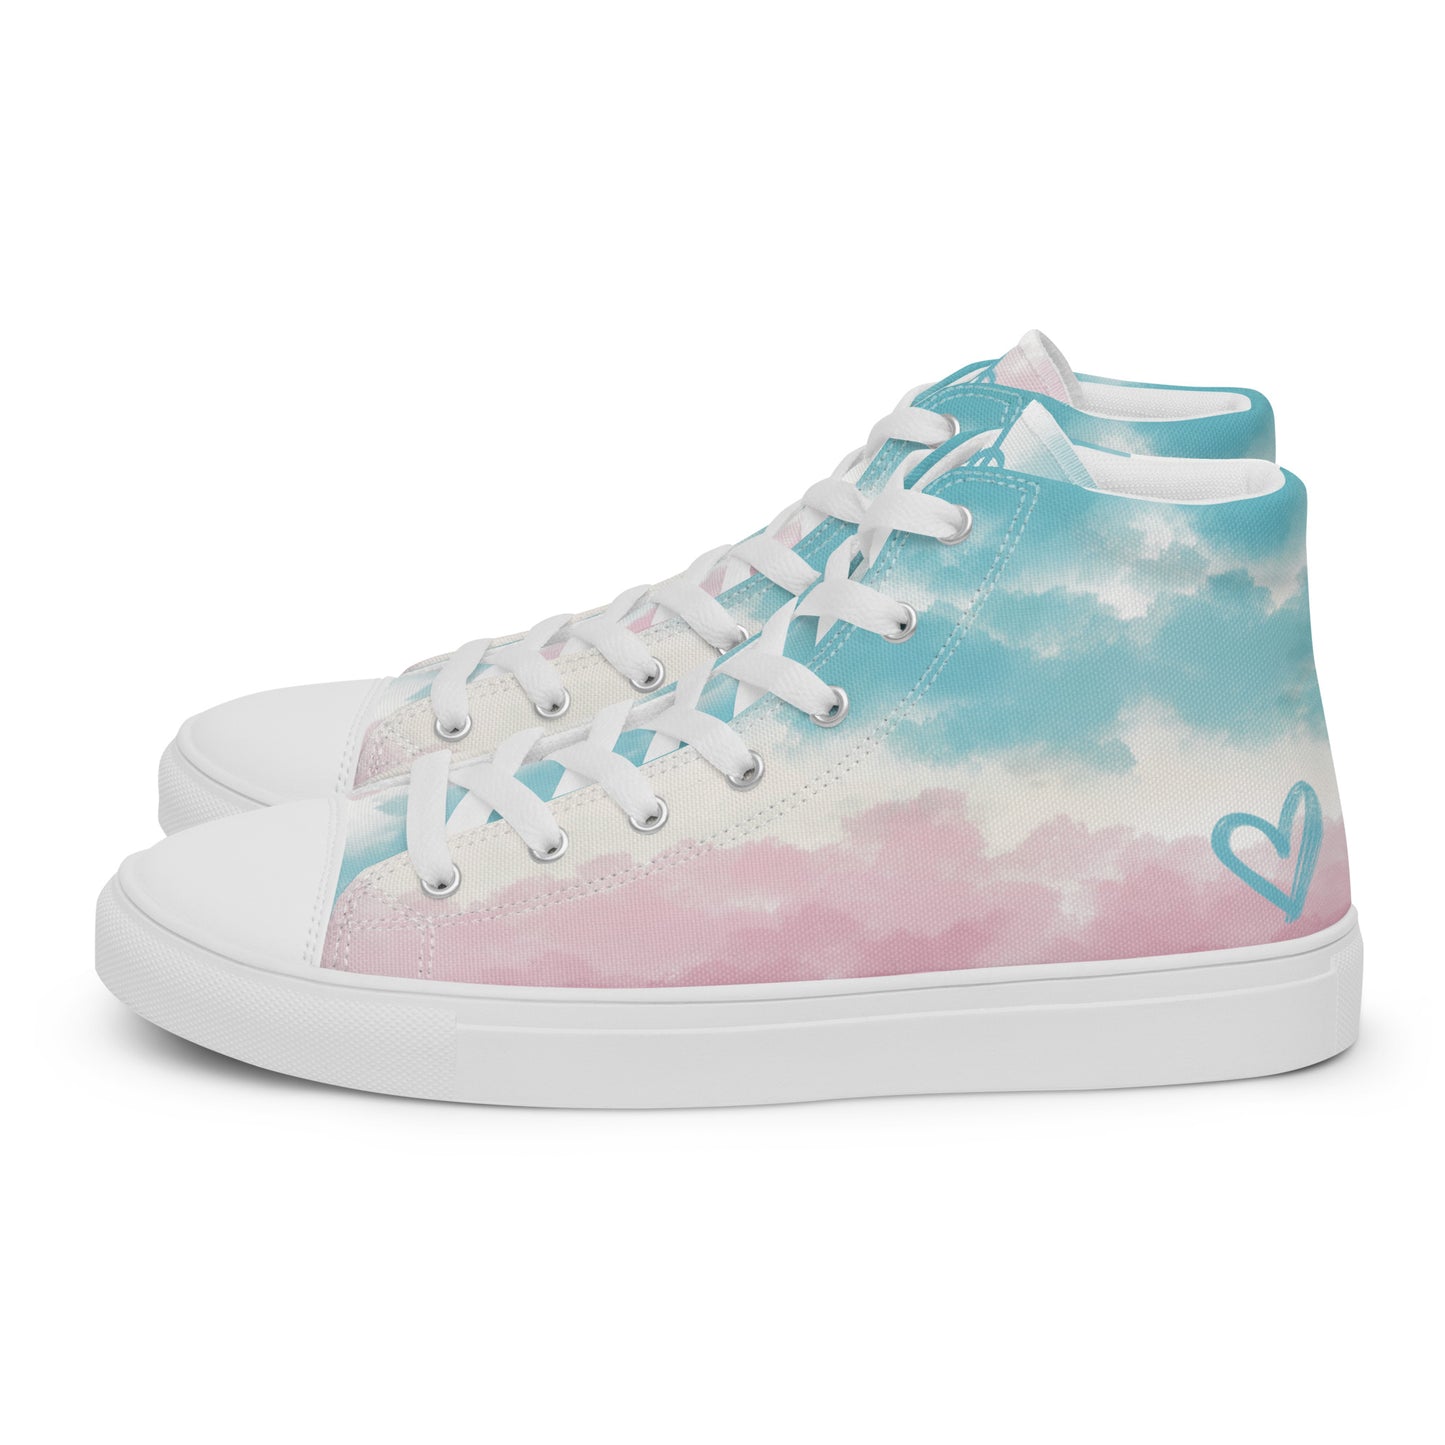 Left side view: High top shoes with a cloudy design in blue, white, and pink has a doodle style heart on the heel, white shoe laces, and white details.